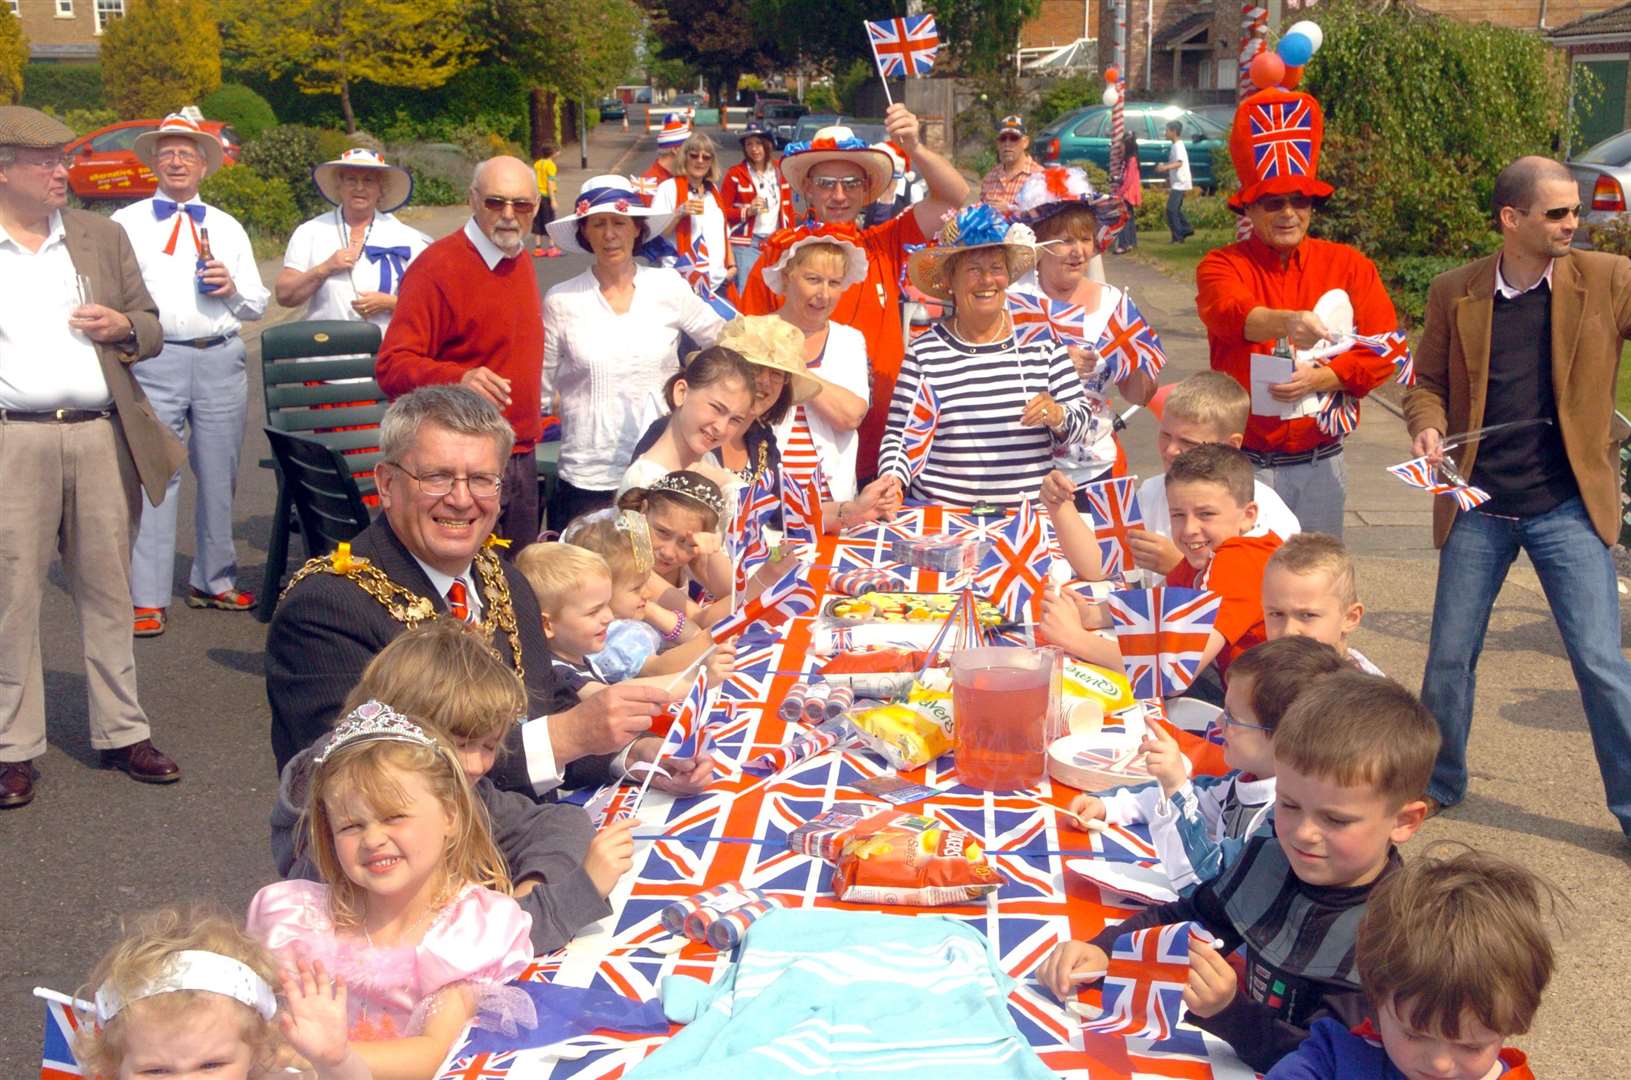 Street parties like this one were held in 2011 when the the Duke and Duchess of Cambridge were married